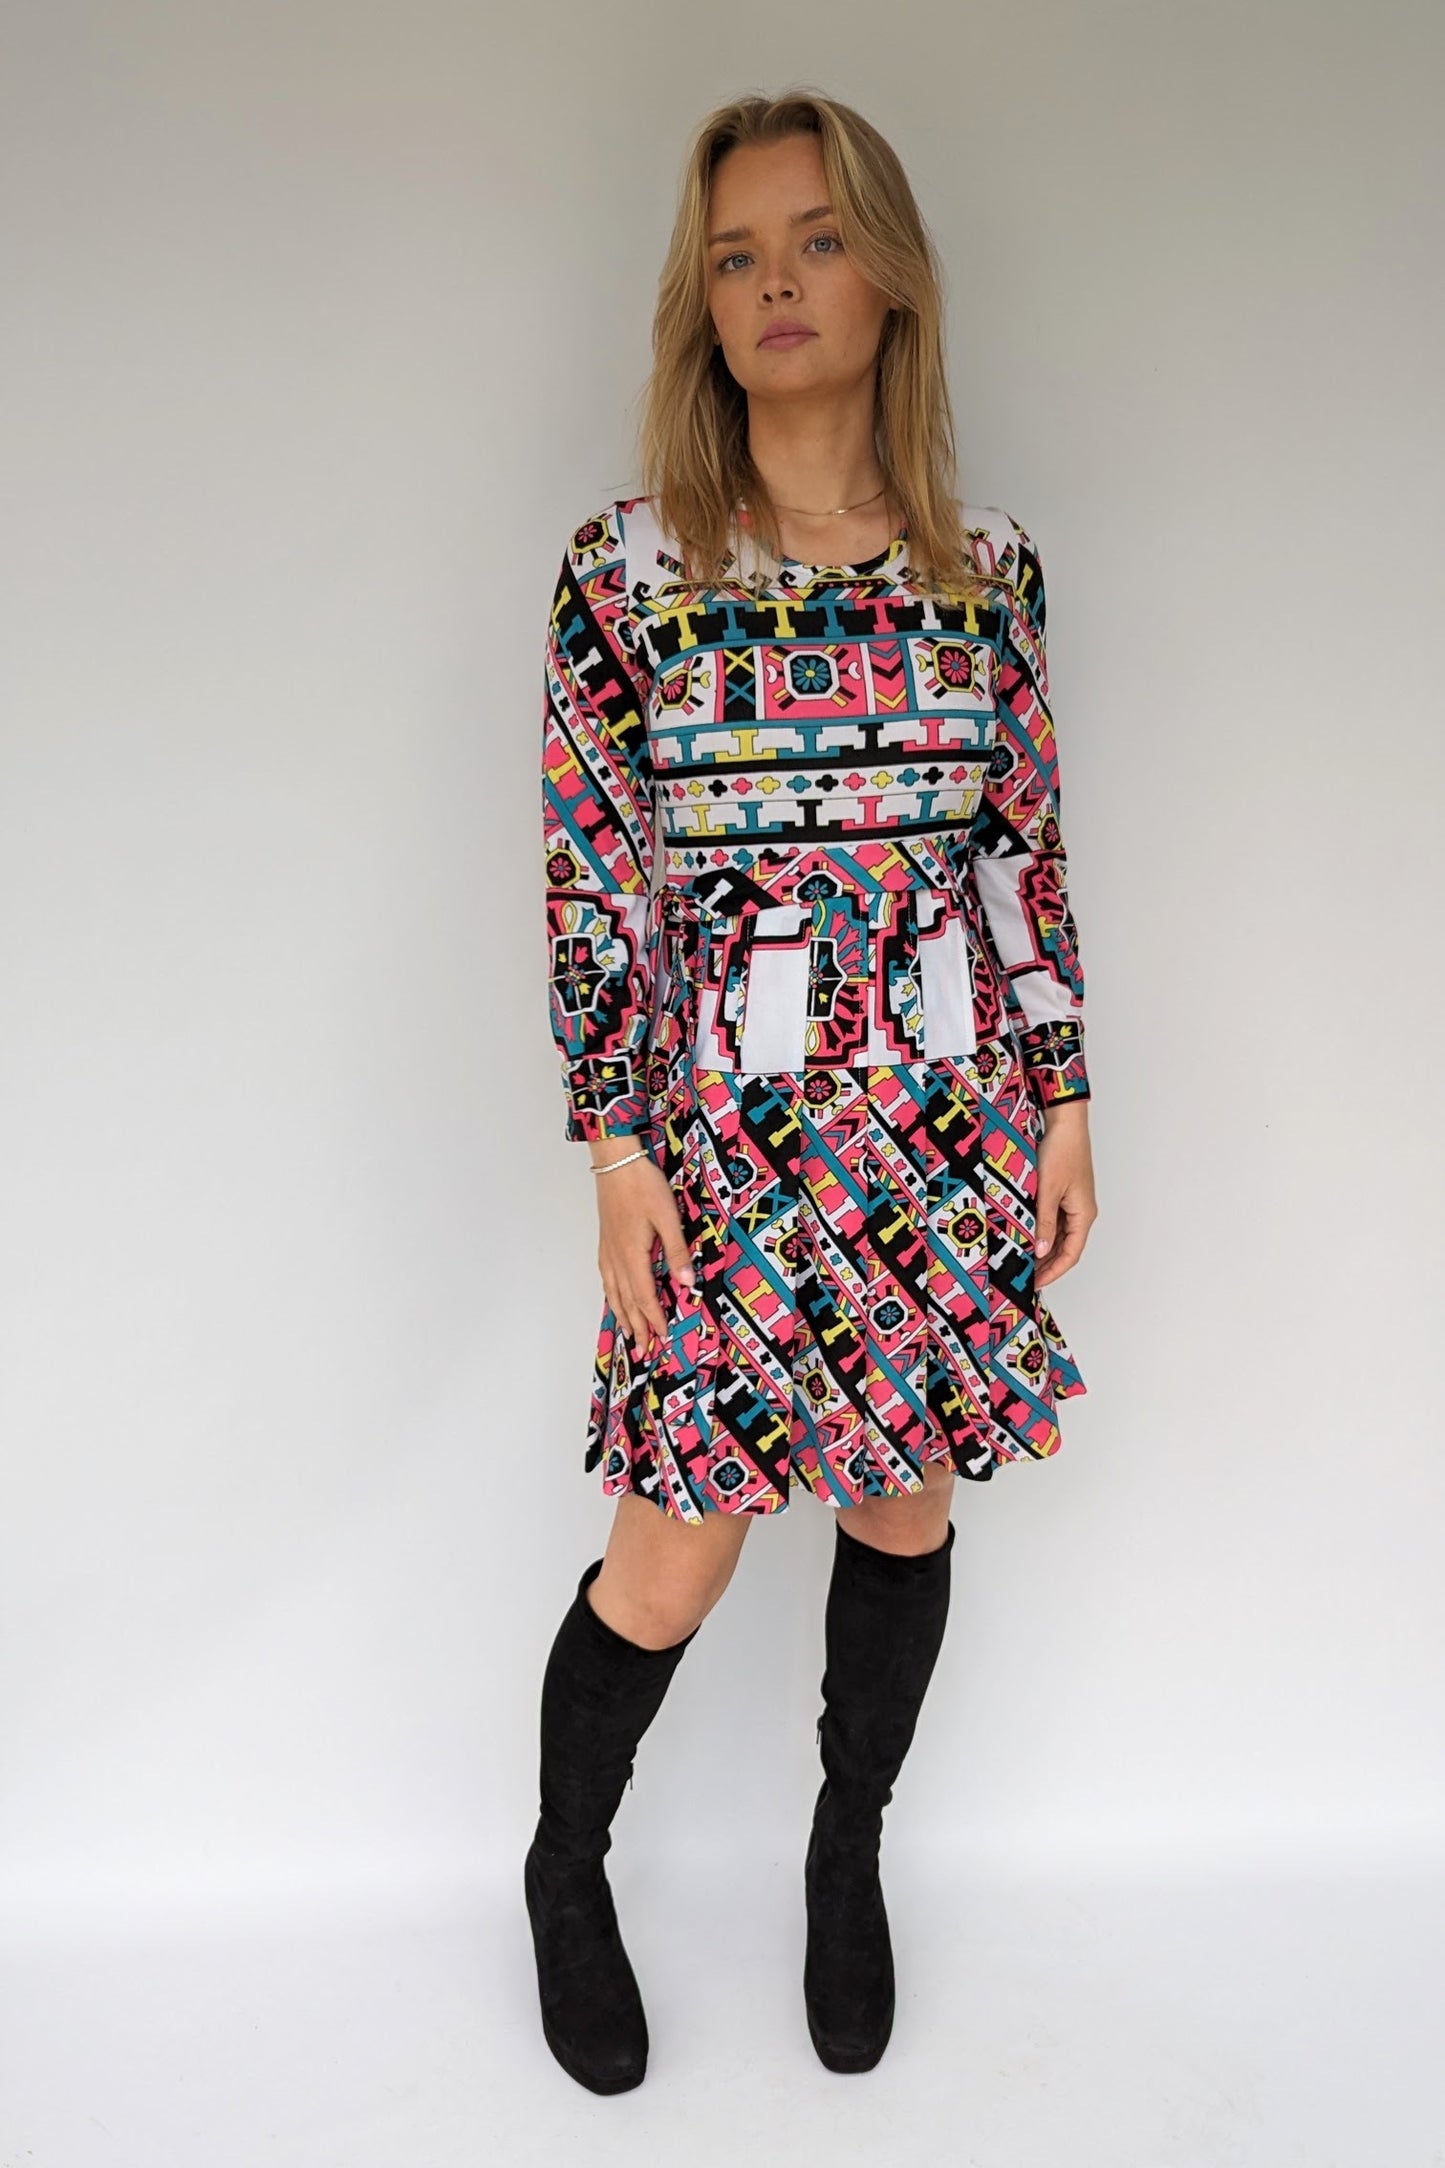 70s vintage patterned dress with belt and pleats in what, black, pink and turquoise geometrics pattern